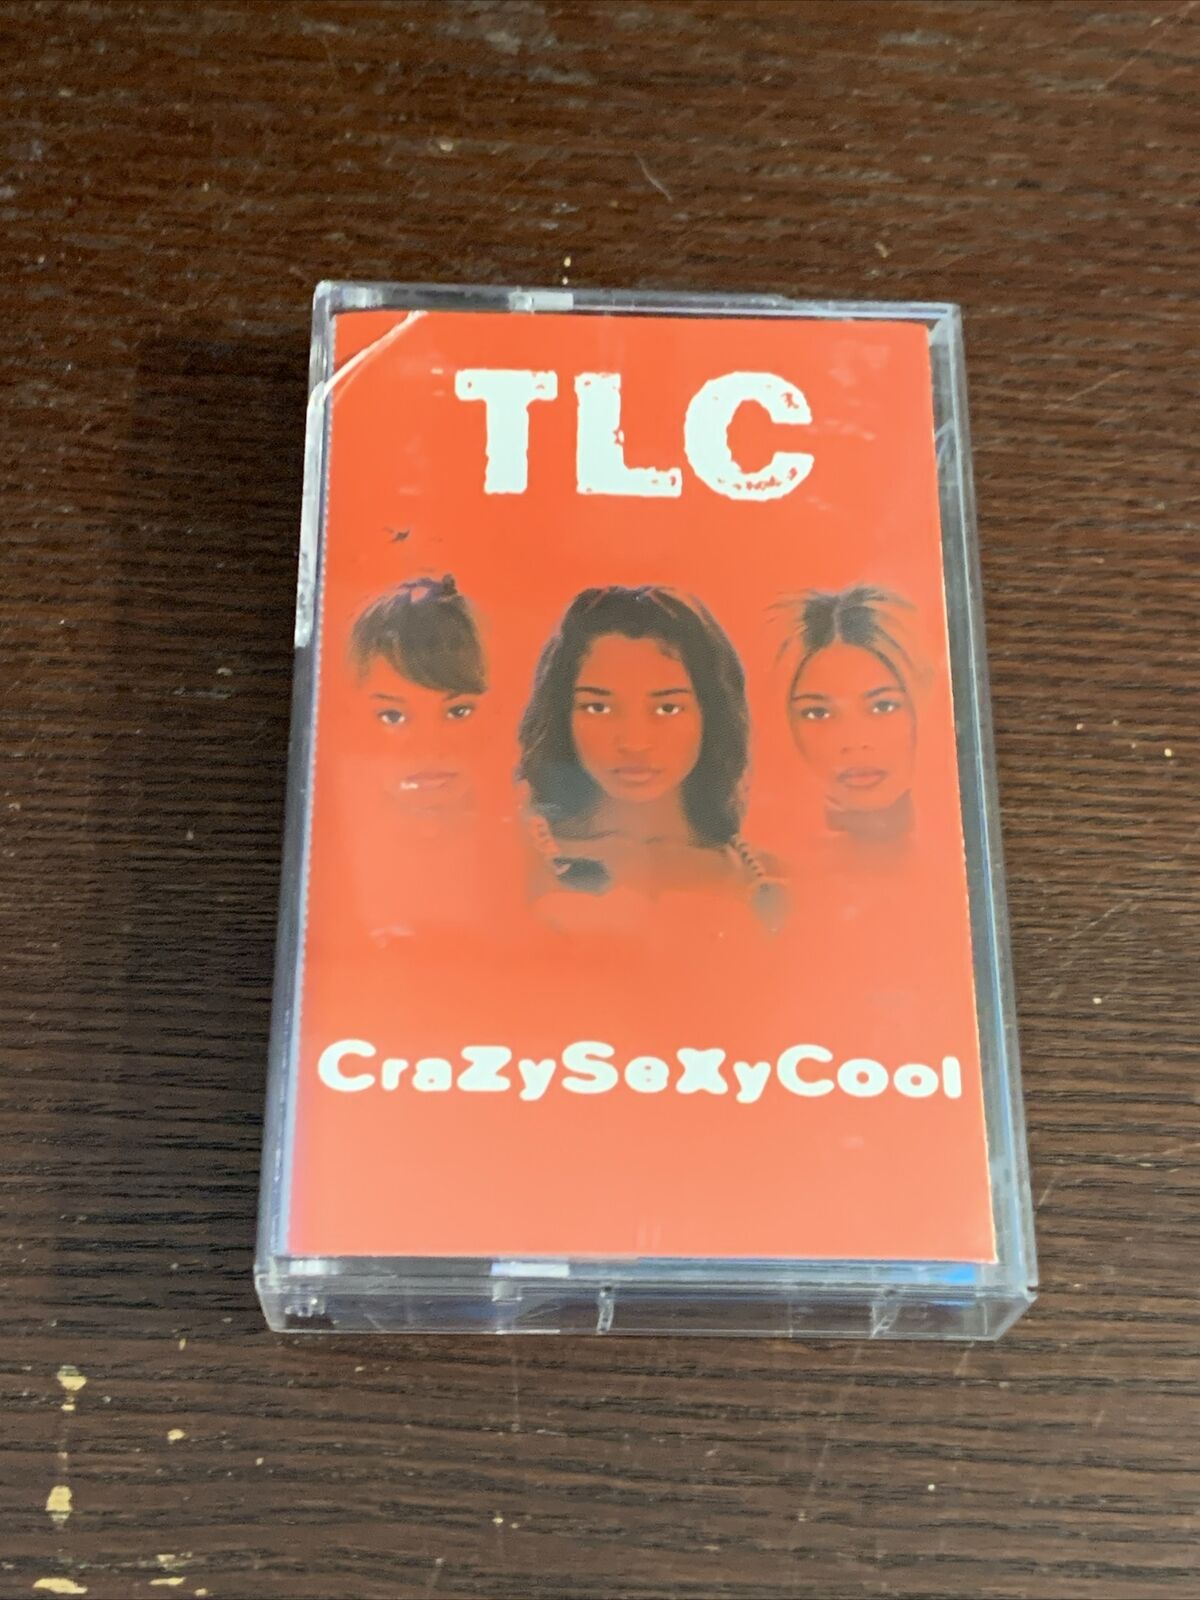 CrazySexyCool by TLC (Cassette, 1994, LaFace) 90s Classic